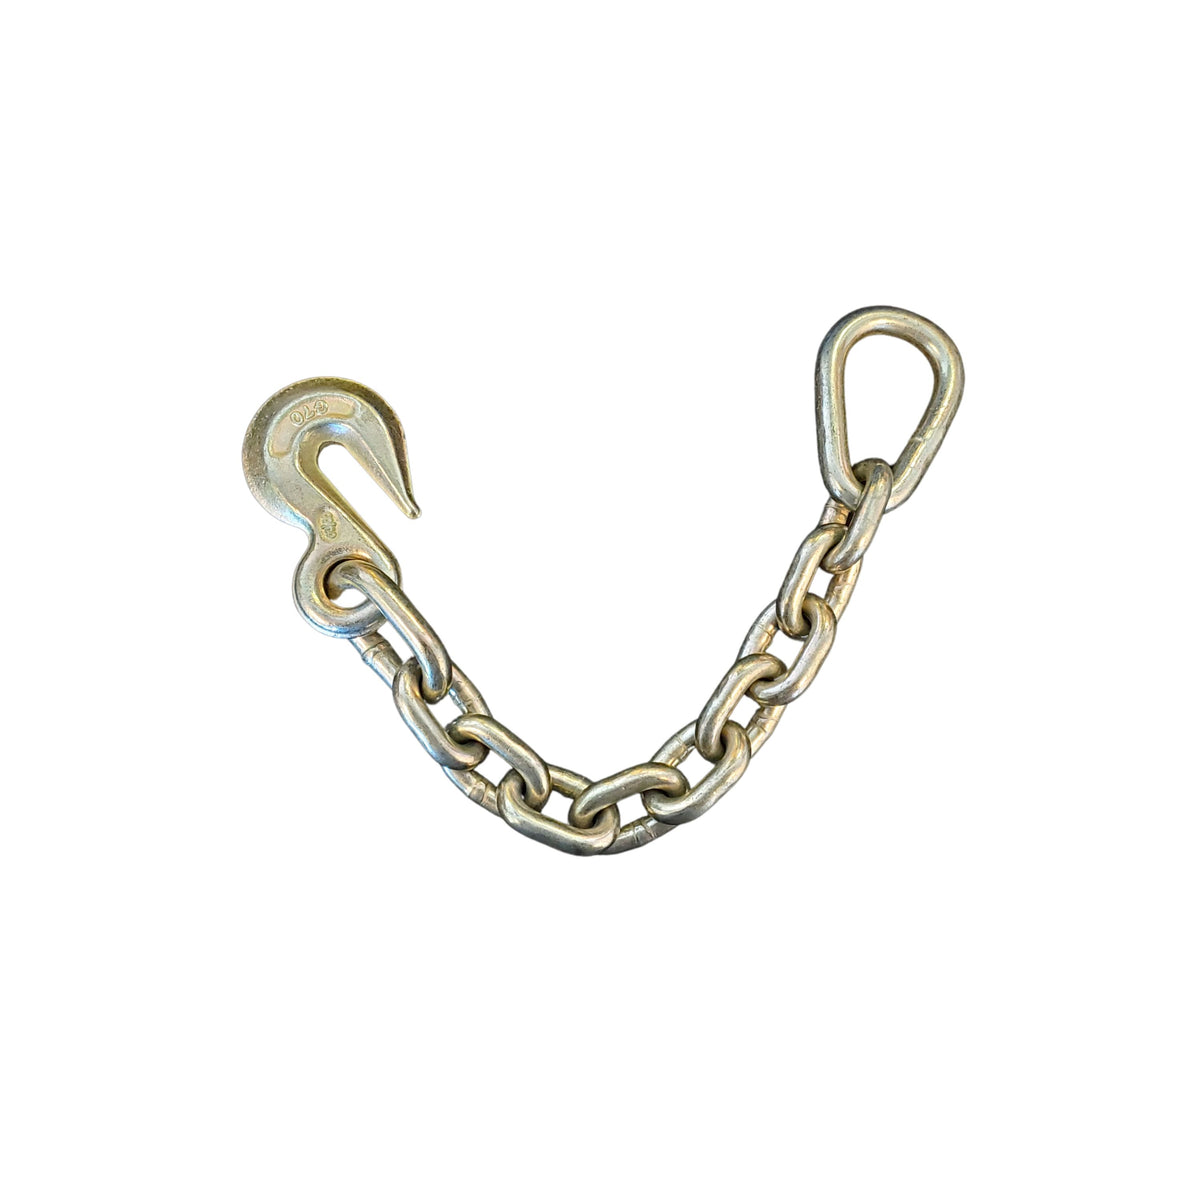 18.5" Grade 70 Chain Extension with Forged Grab Hook and Pear Link